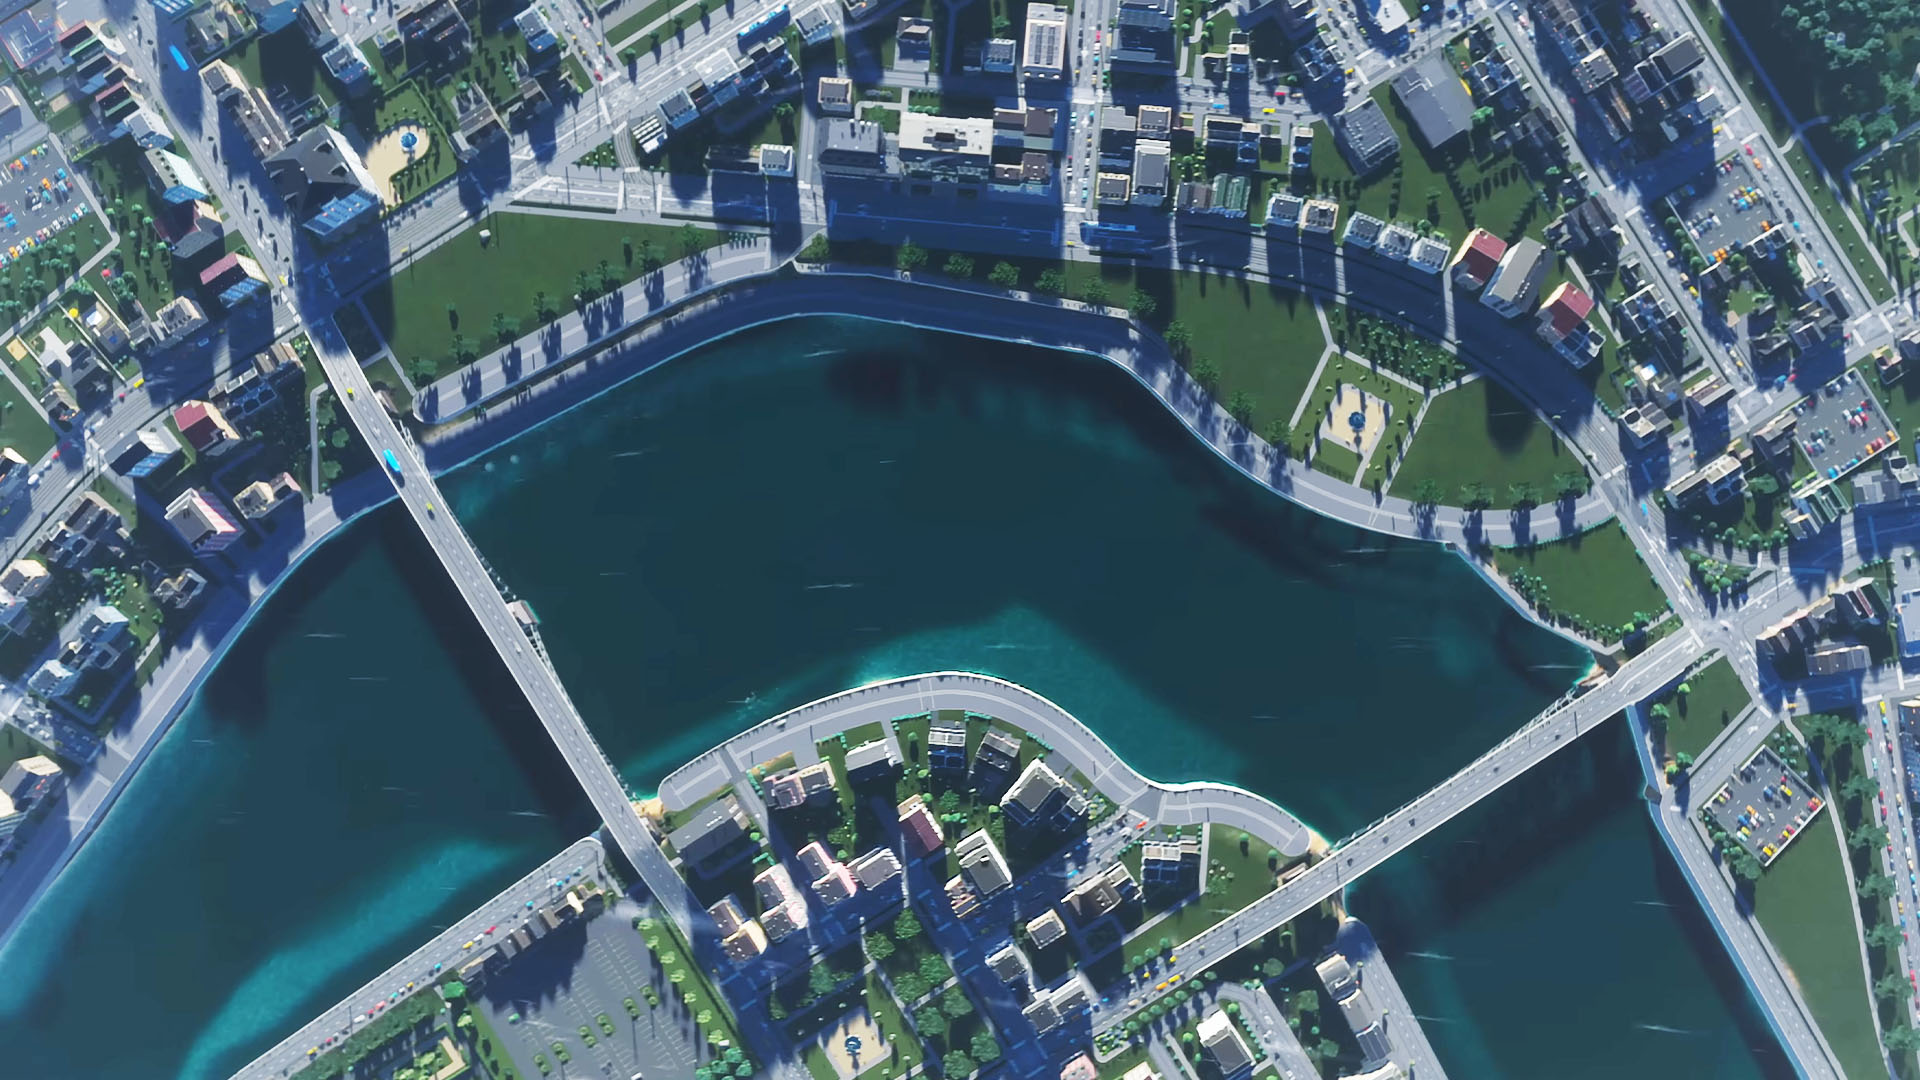 Cities: Skylines 2 - Best Settings and System Requirements - Prima Games